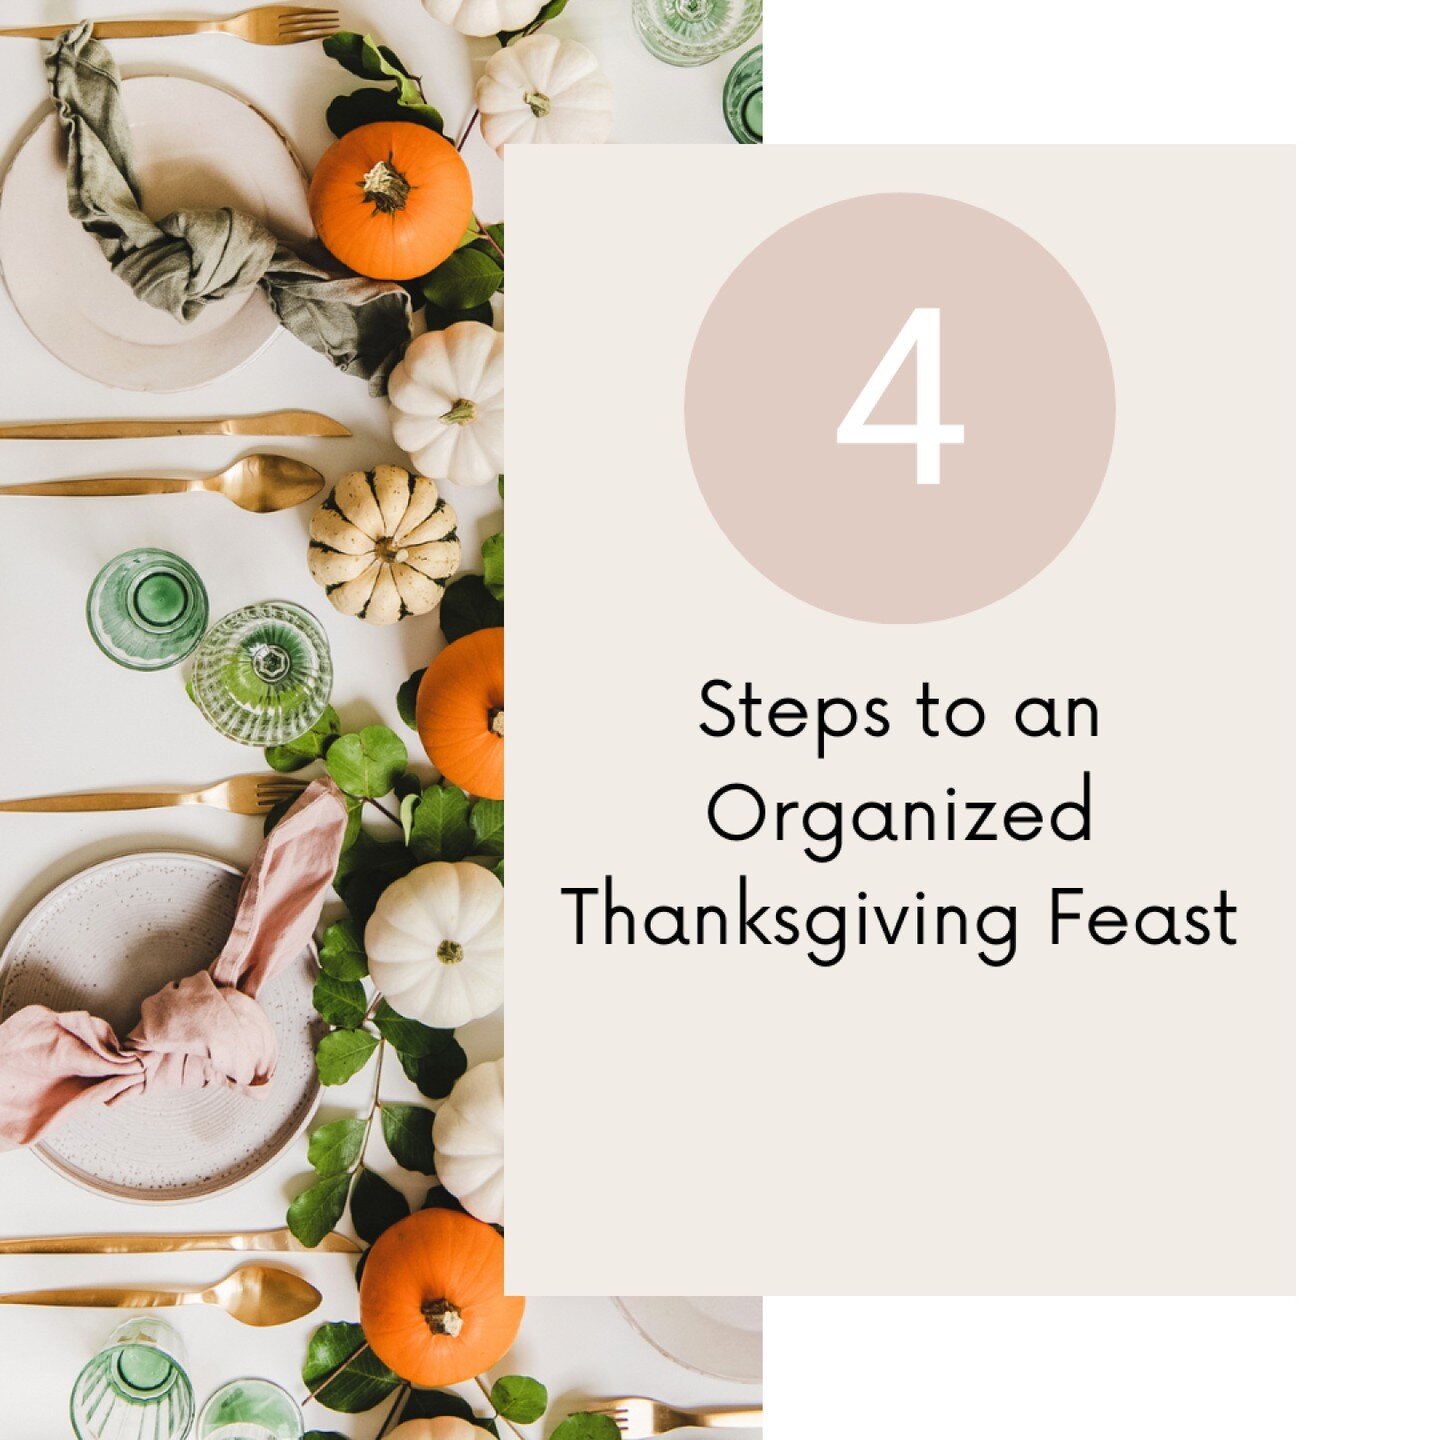 Thanksgiving Hosts, unite! Organizing the feast? 

Step 1: Plan that menu like a pro &ndash; mix traditions with some new flair!
Step 2: Delegate tasks to the willing troops; no need to be a solo superhero. 
Step 3: Embrace the potluck vibes, let eve